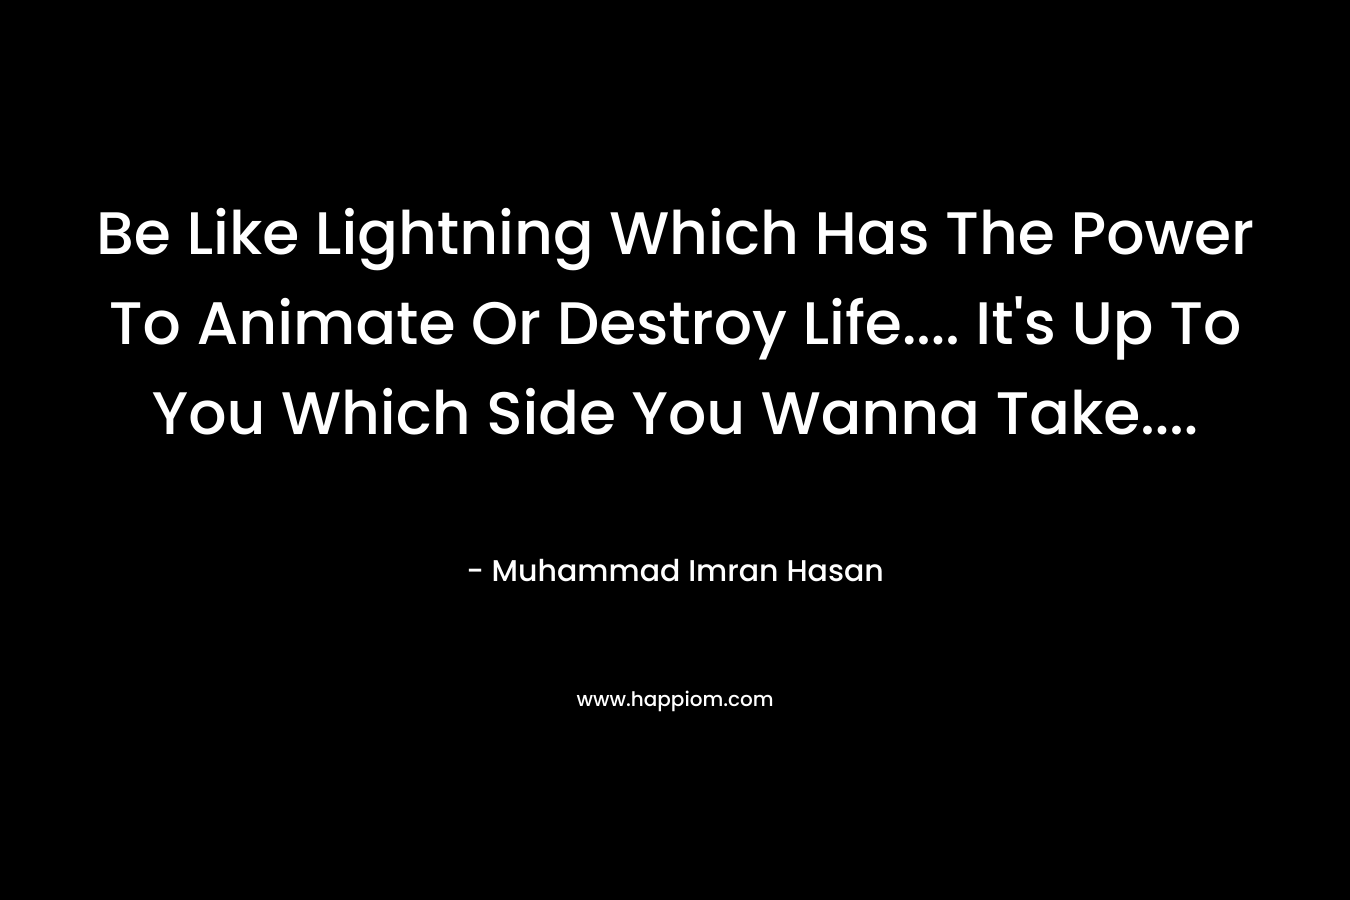 Be Like Lightning Which Has The Power To Animate Or Destroy Life…. It’s Up To You Which Side You Wanna Take…. – Muhammad Imran Hasan